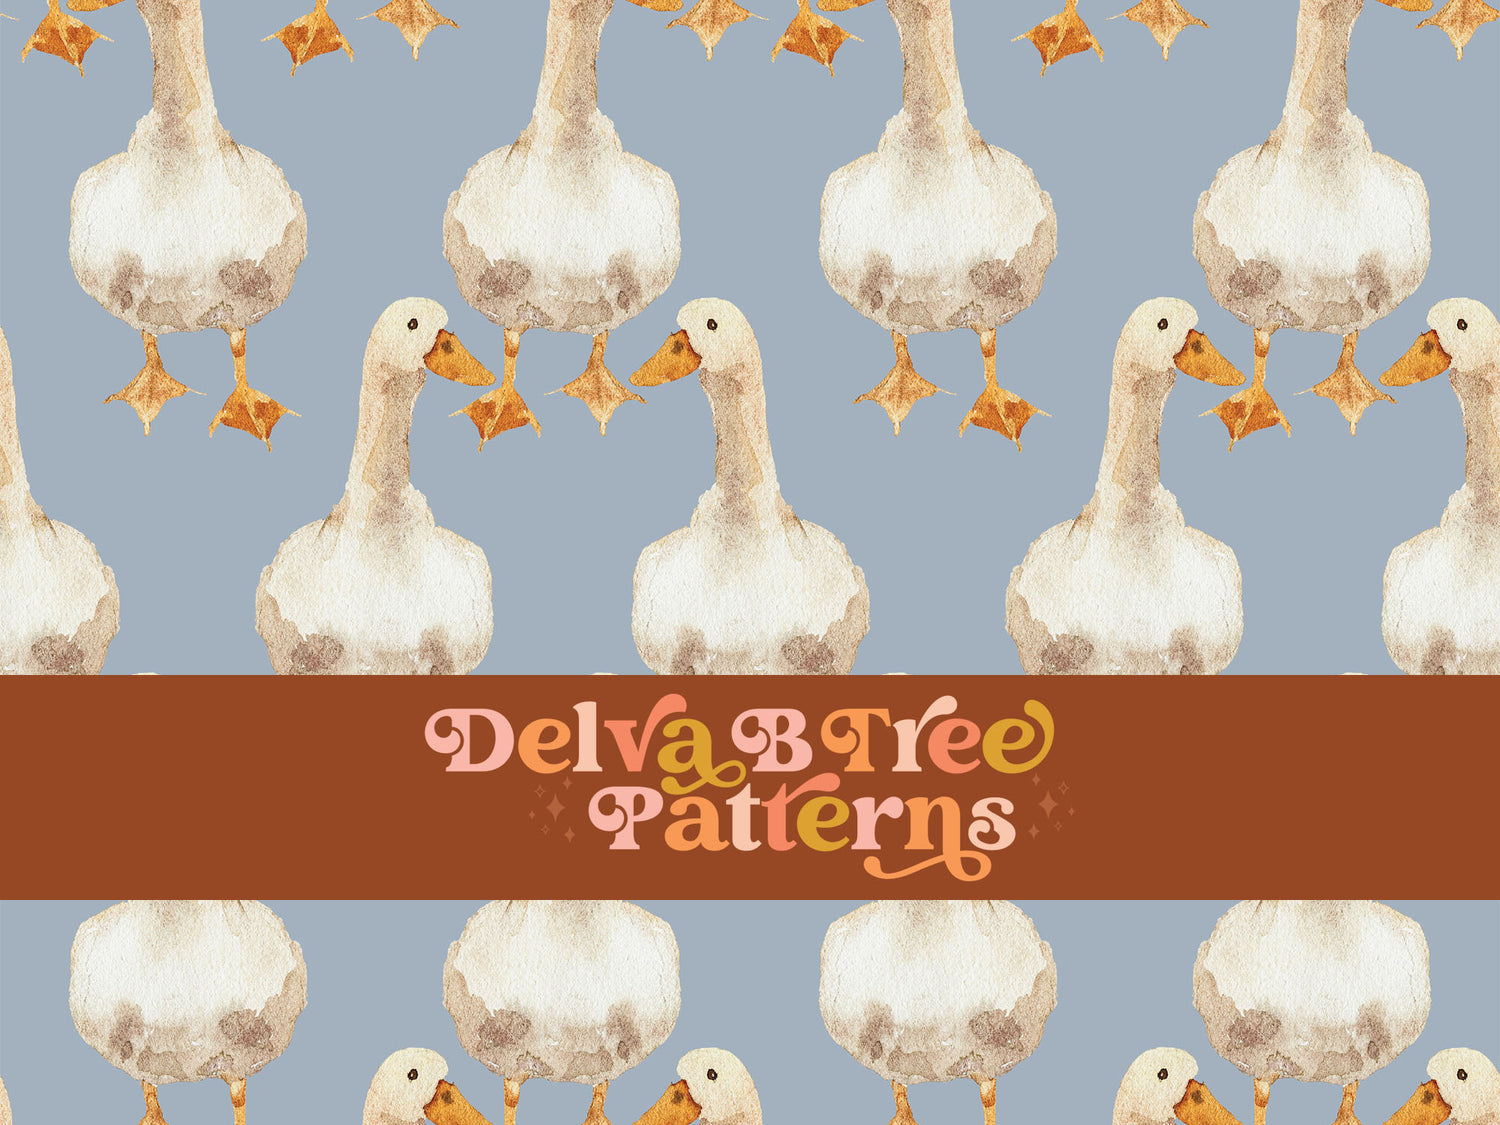 Watercolor geese on a cadet blue background seamless file for fabric printing. retro looking goose repeat pattern for textiles, polymailers, baby boy lovey blankets, nursery crib bedding, kids clothing, girls hair accessories, home decor accents, pet products.